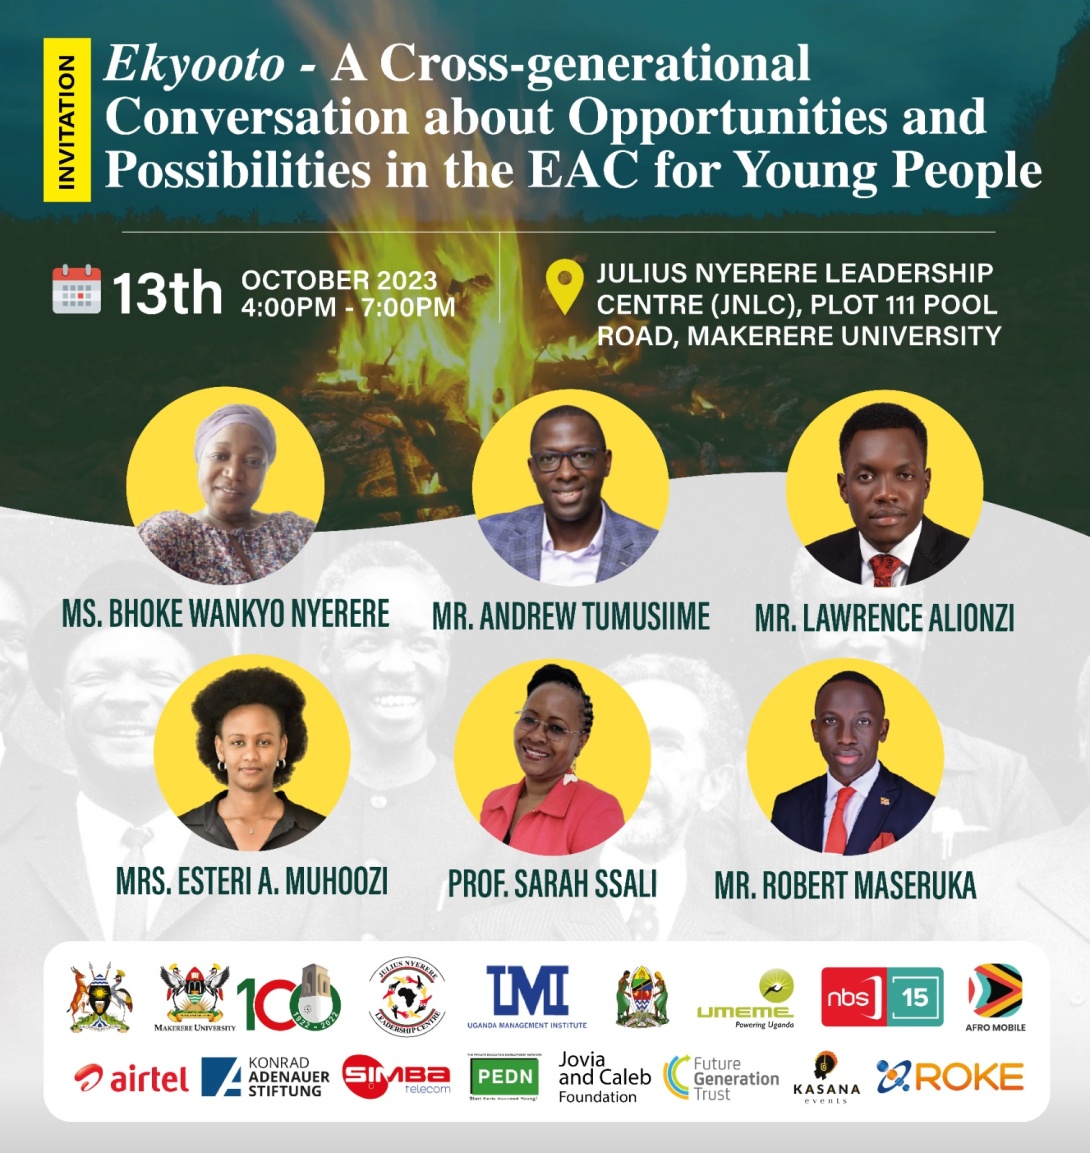 JNLC: Ekyooto - A Cross-generational Conversation about Opportunities and Possibilities in the EAC for Young People, 13th October 2023, 4:00 to 7:00PM EAT, The Julius Nyerere Leadership Centre (JNLC), Plot 111 Pool Road, Makerere University.